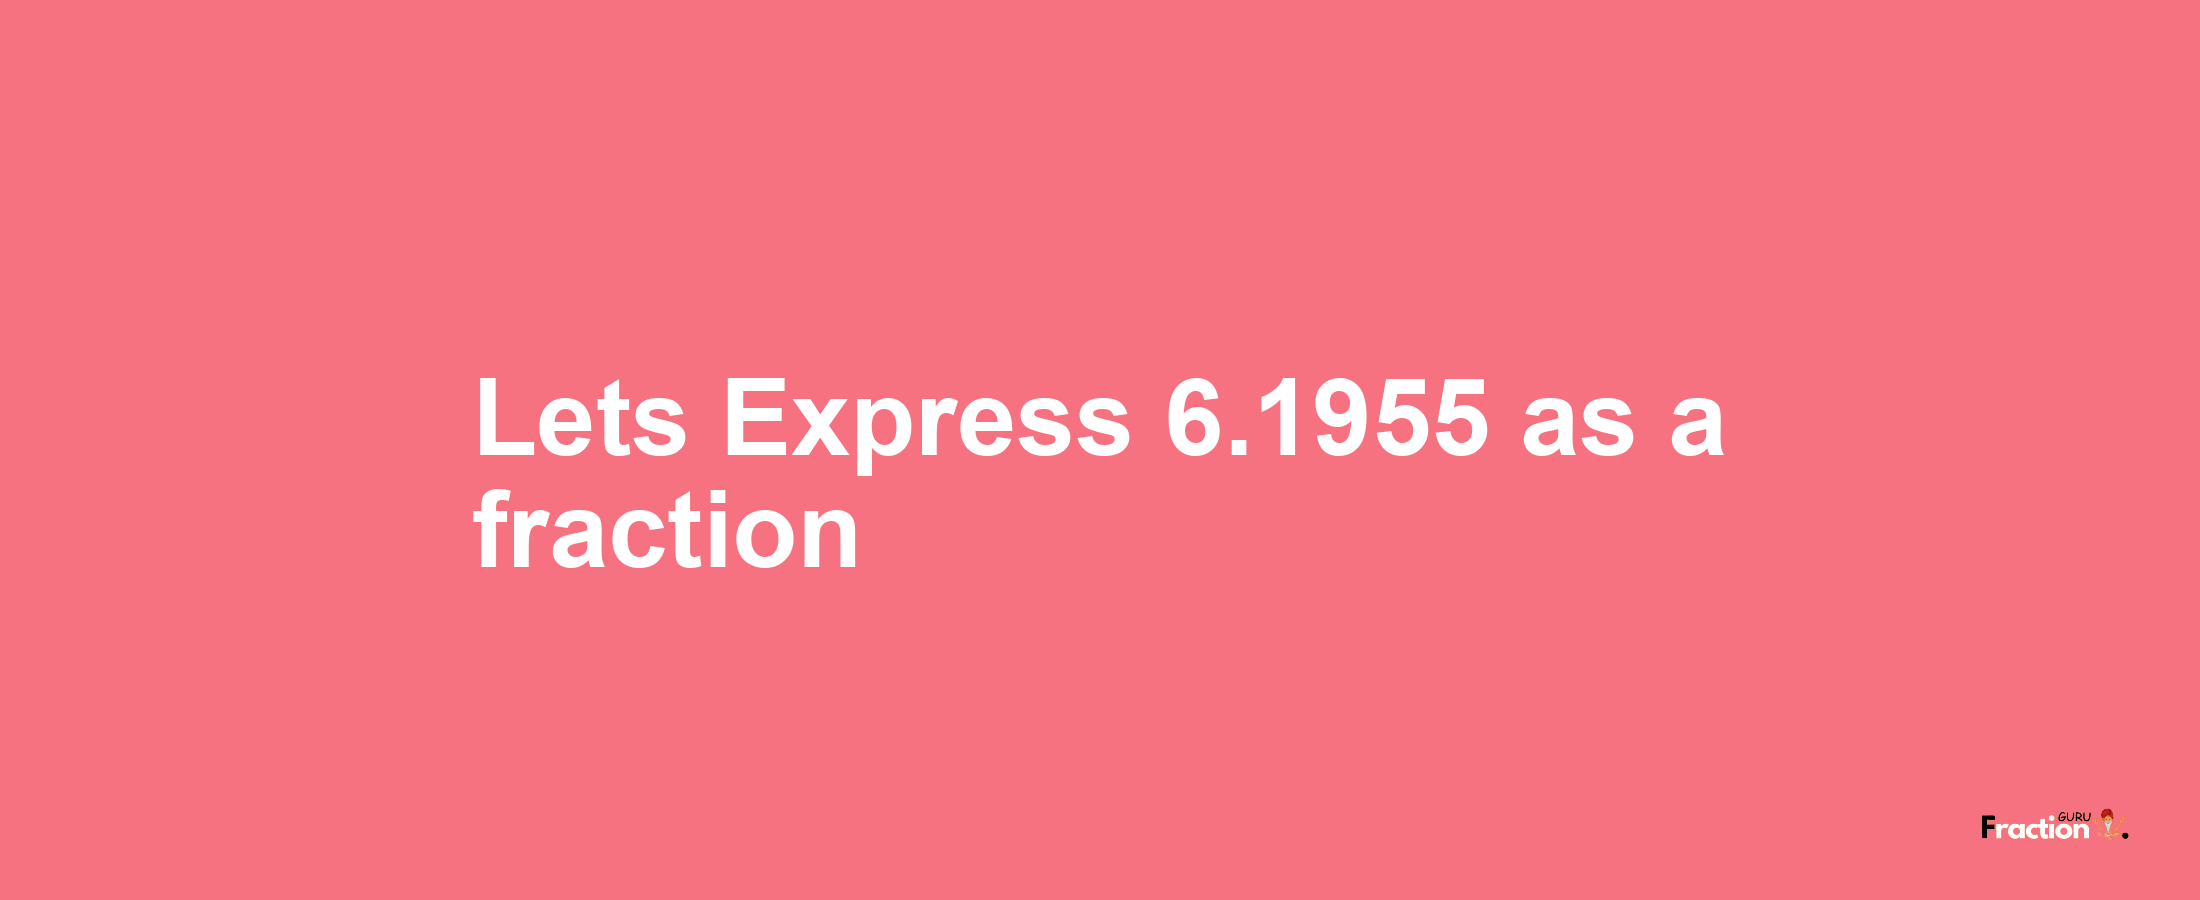 Lets Express 6.1955 as afraction